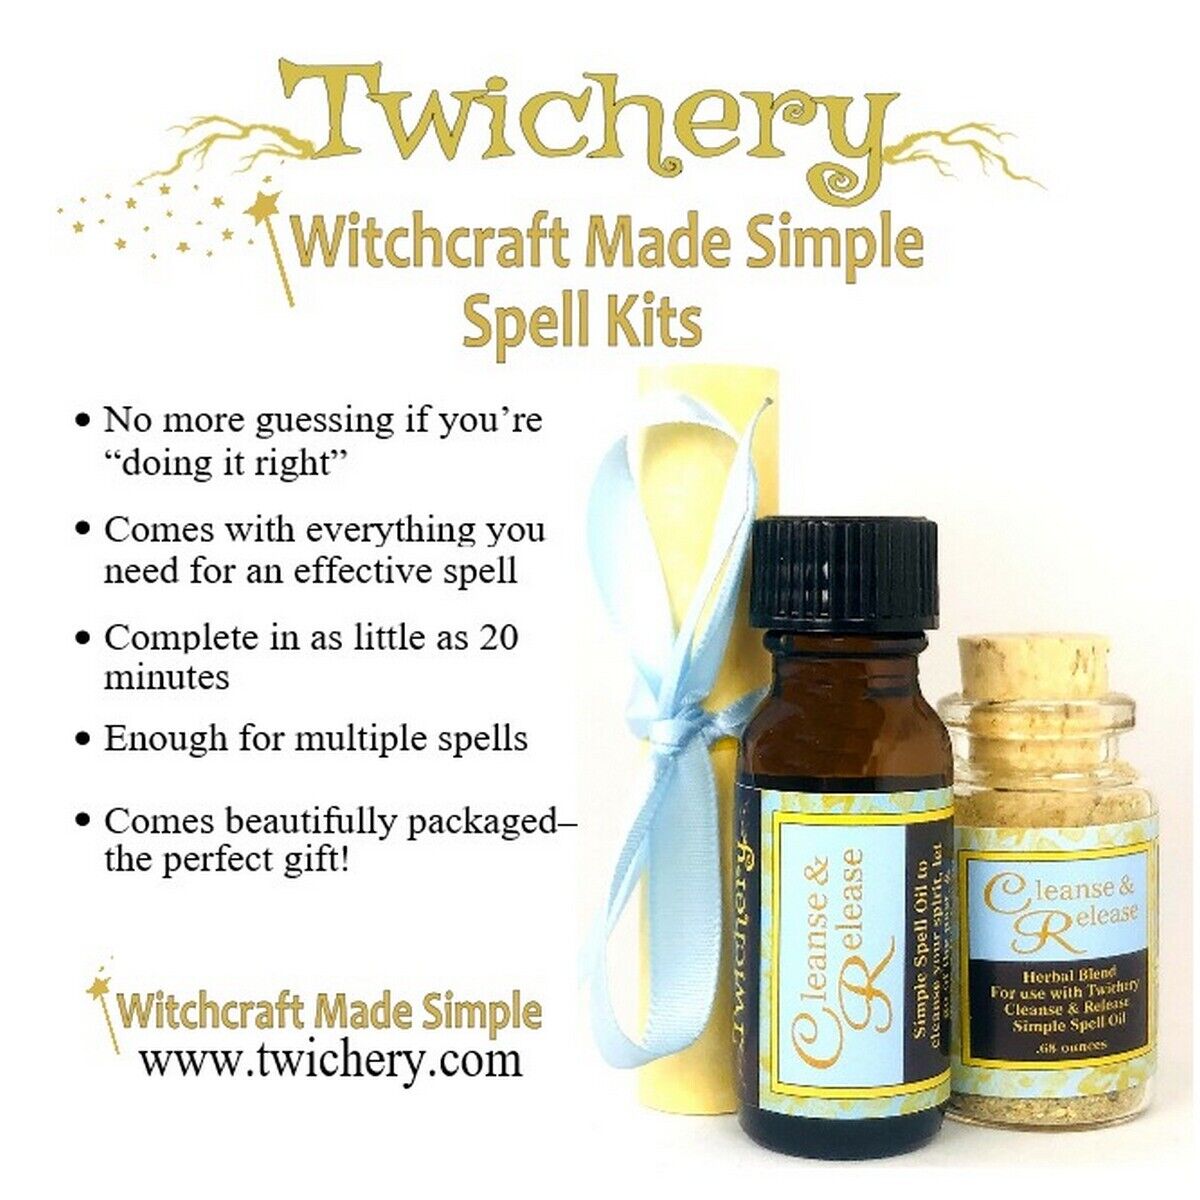 CLEANSE & RELEASE SPELL Cut & Clear, Forget It, Move On Start Over FROM TWICHERY